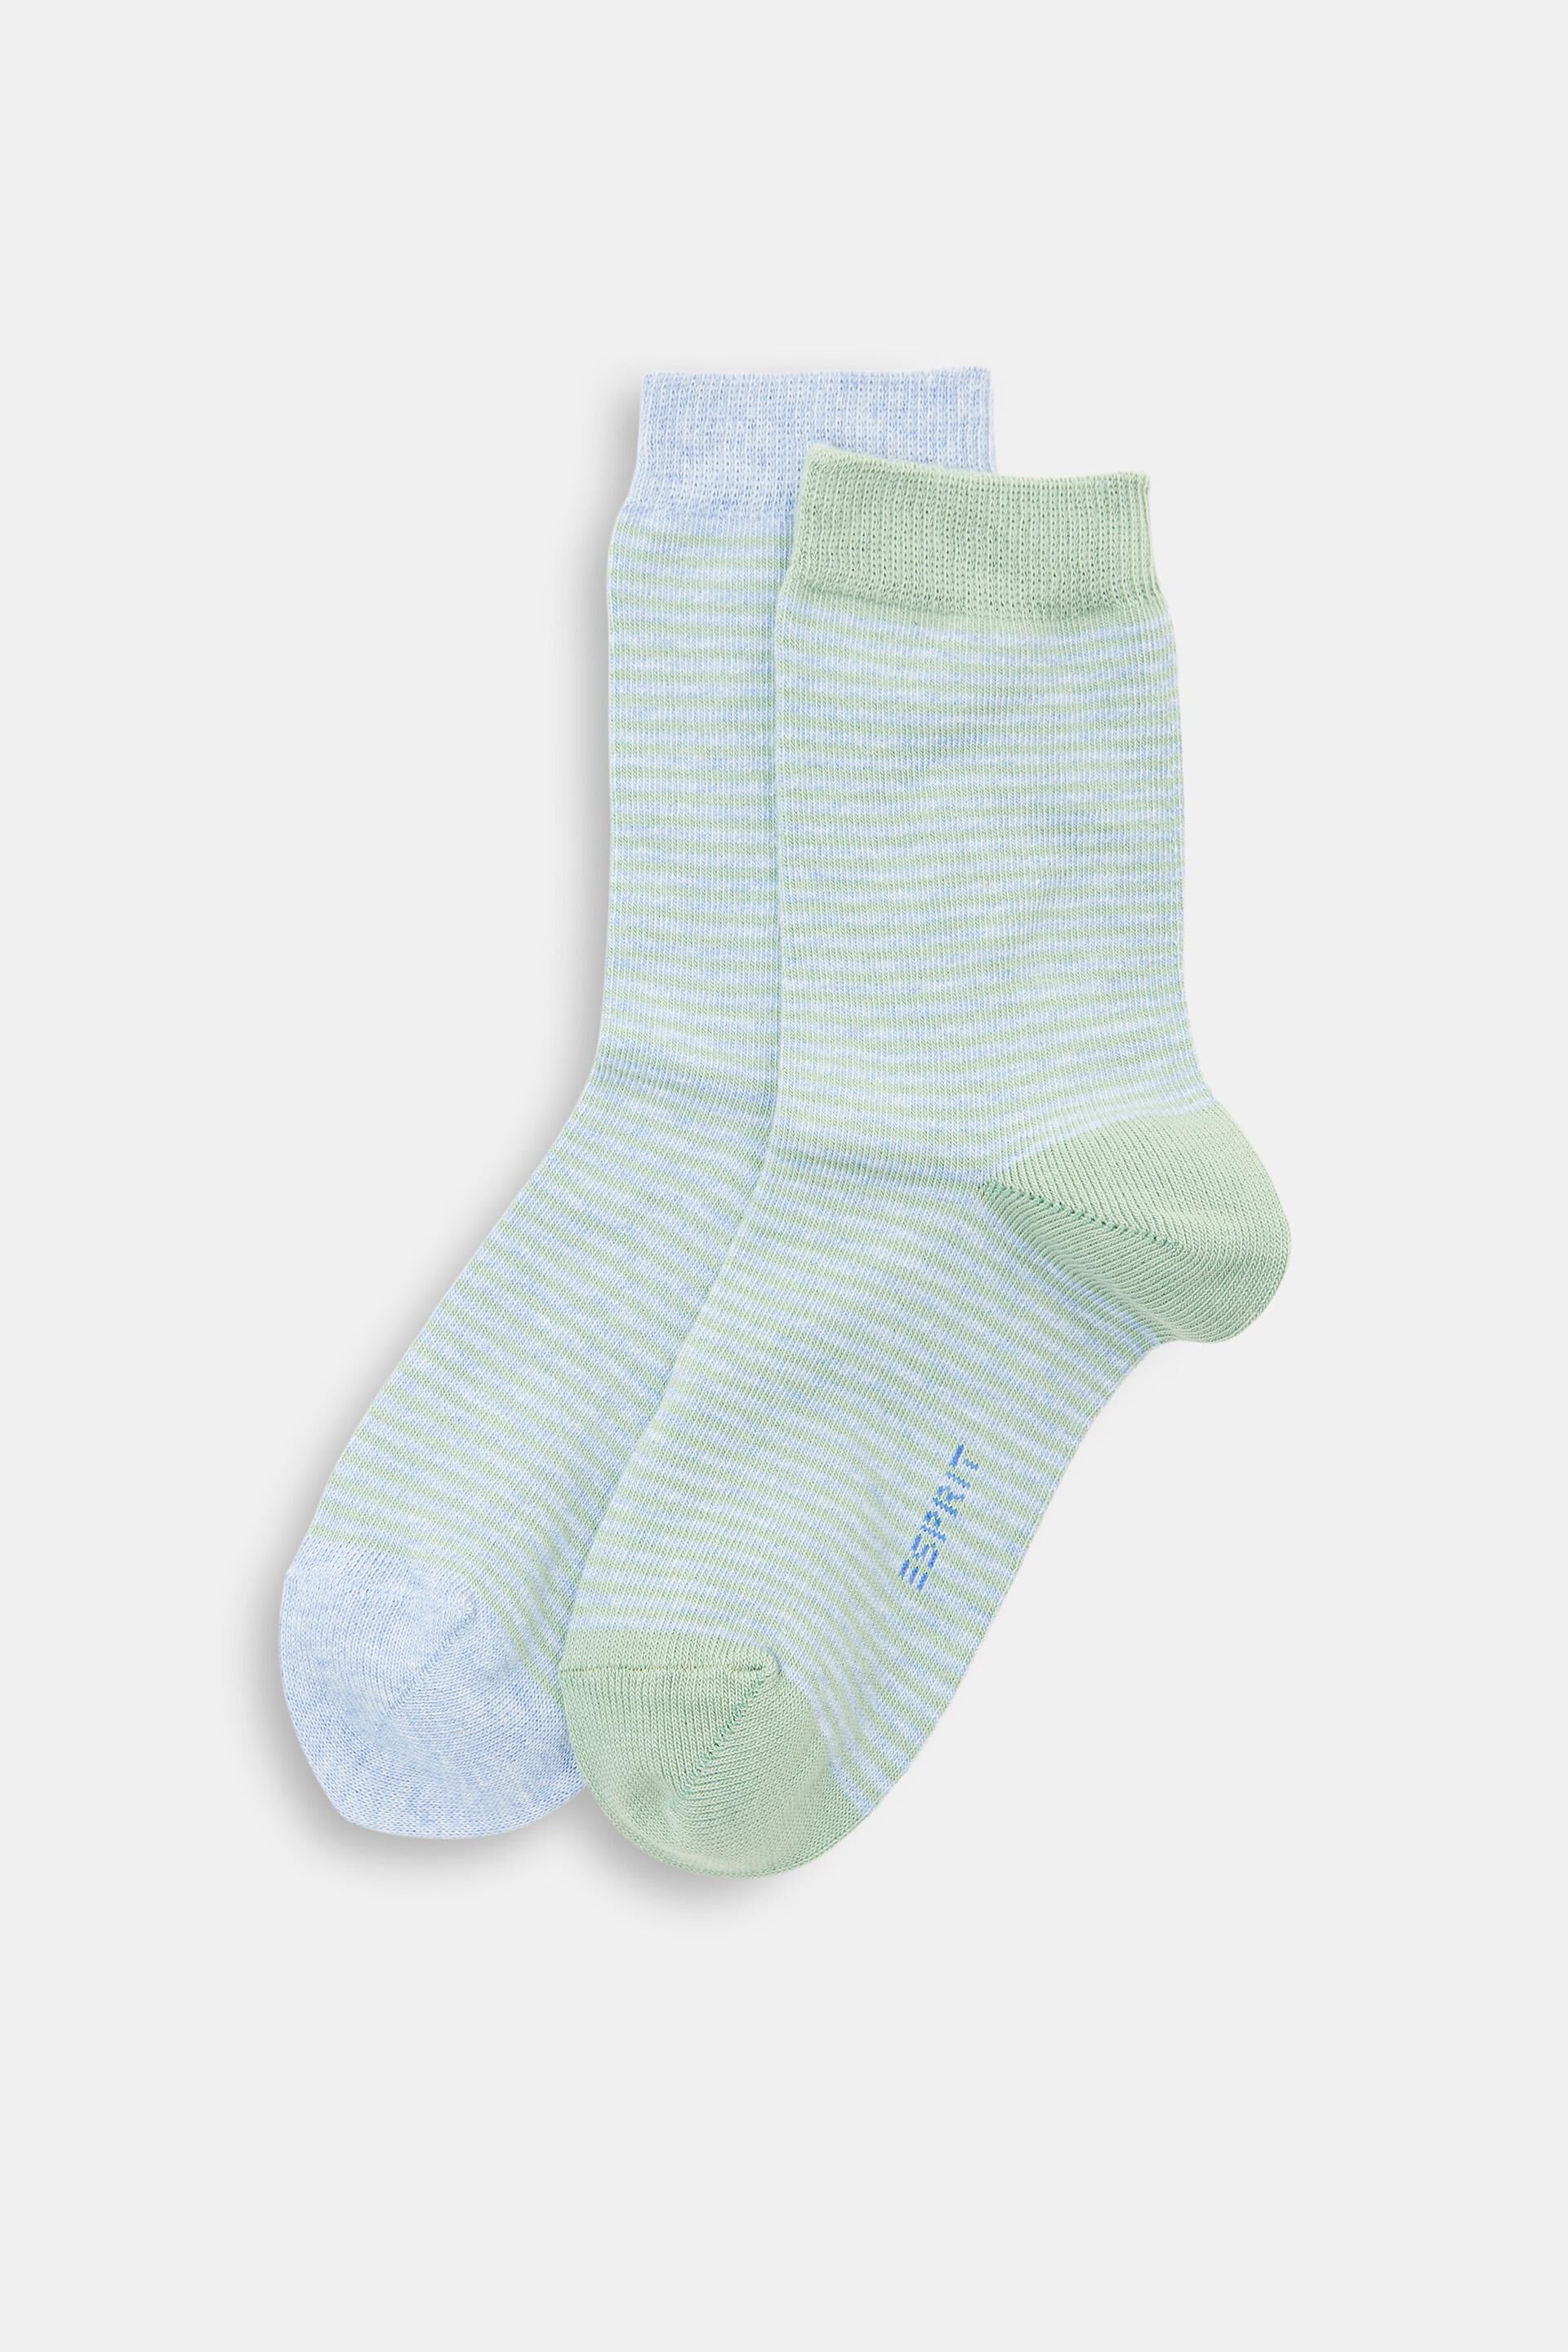 Esprit cotton socks, pack Double striped organic of